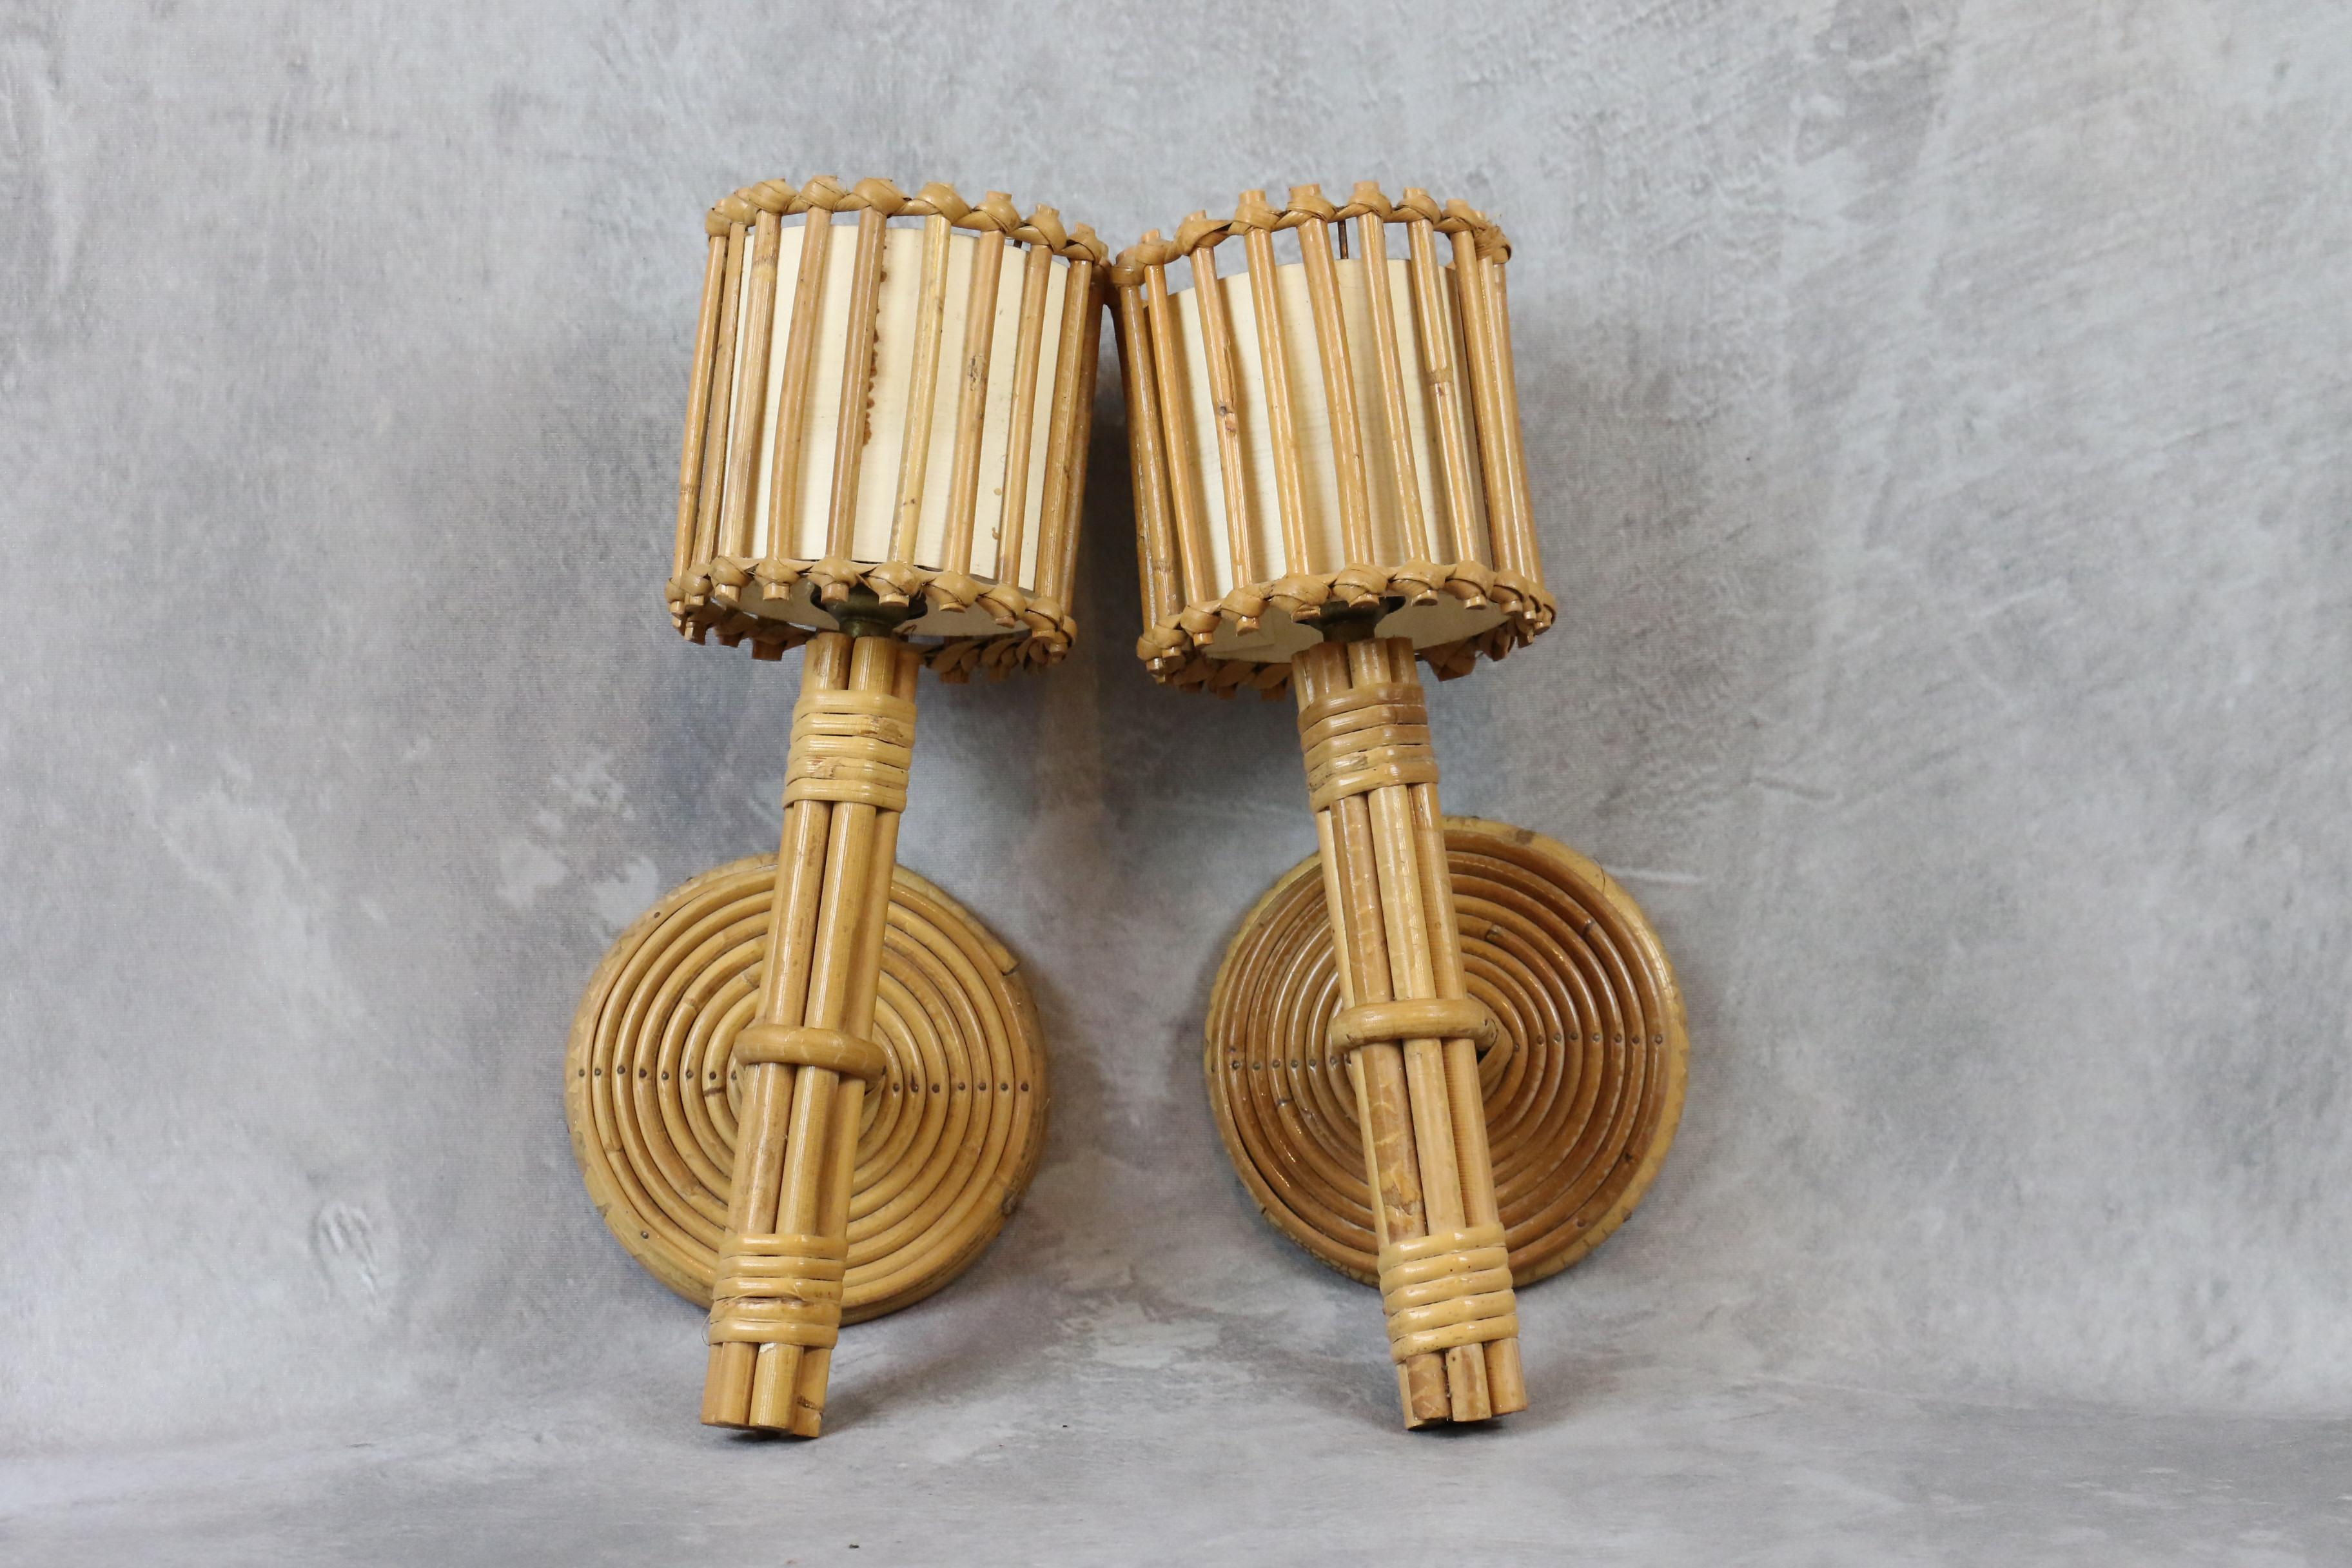 Louis Sognot bamboo and rattan pair of wall lamps Mid-Century Modern 1960 France

Beautiful pair of mid-century sconces by the French designer Louis Sognot. It is very well made. The artist has created many models using bamboo and rattan for the